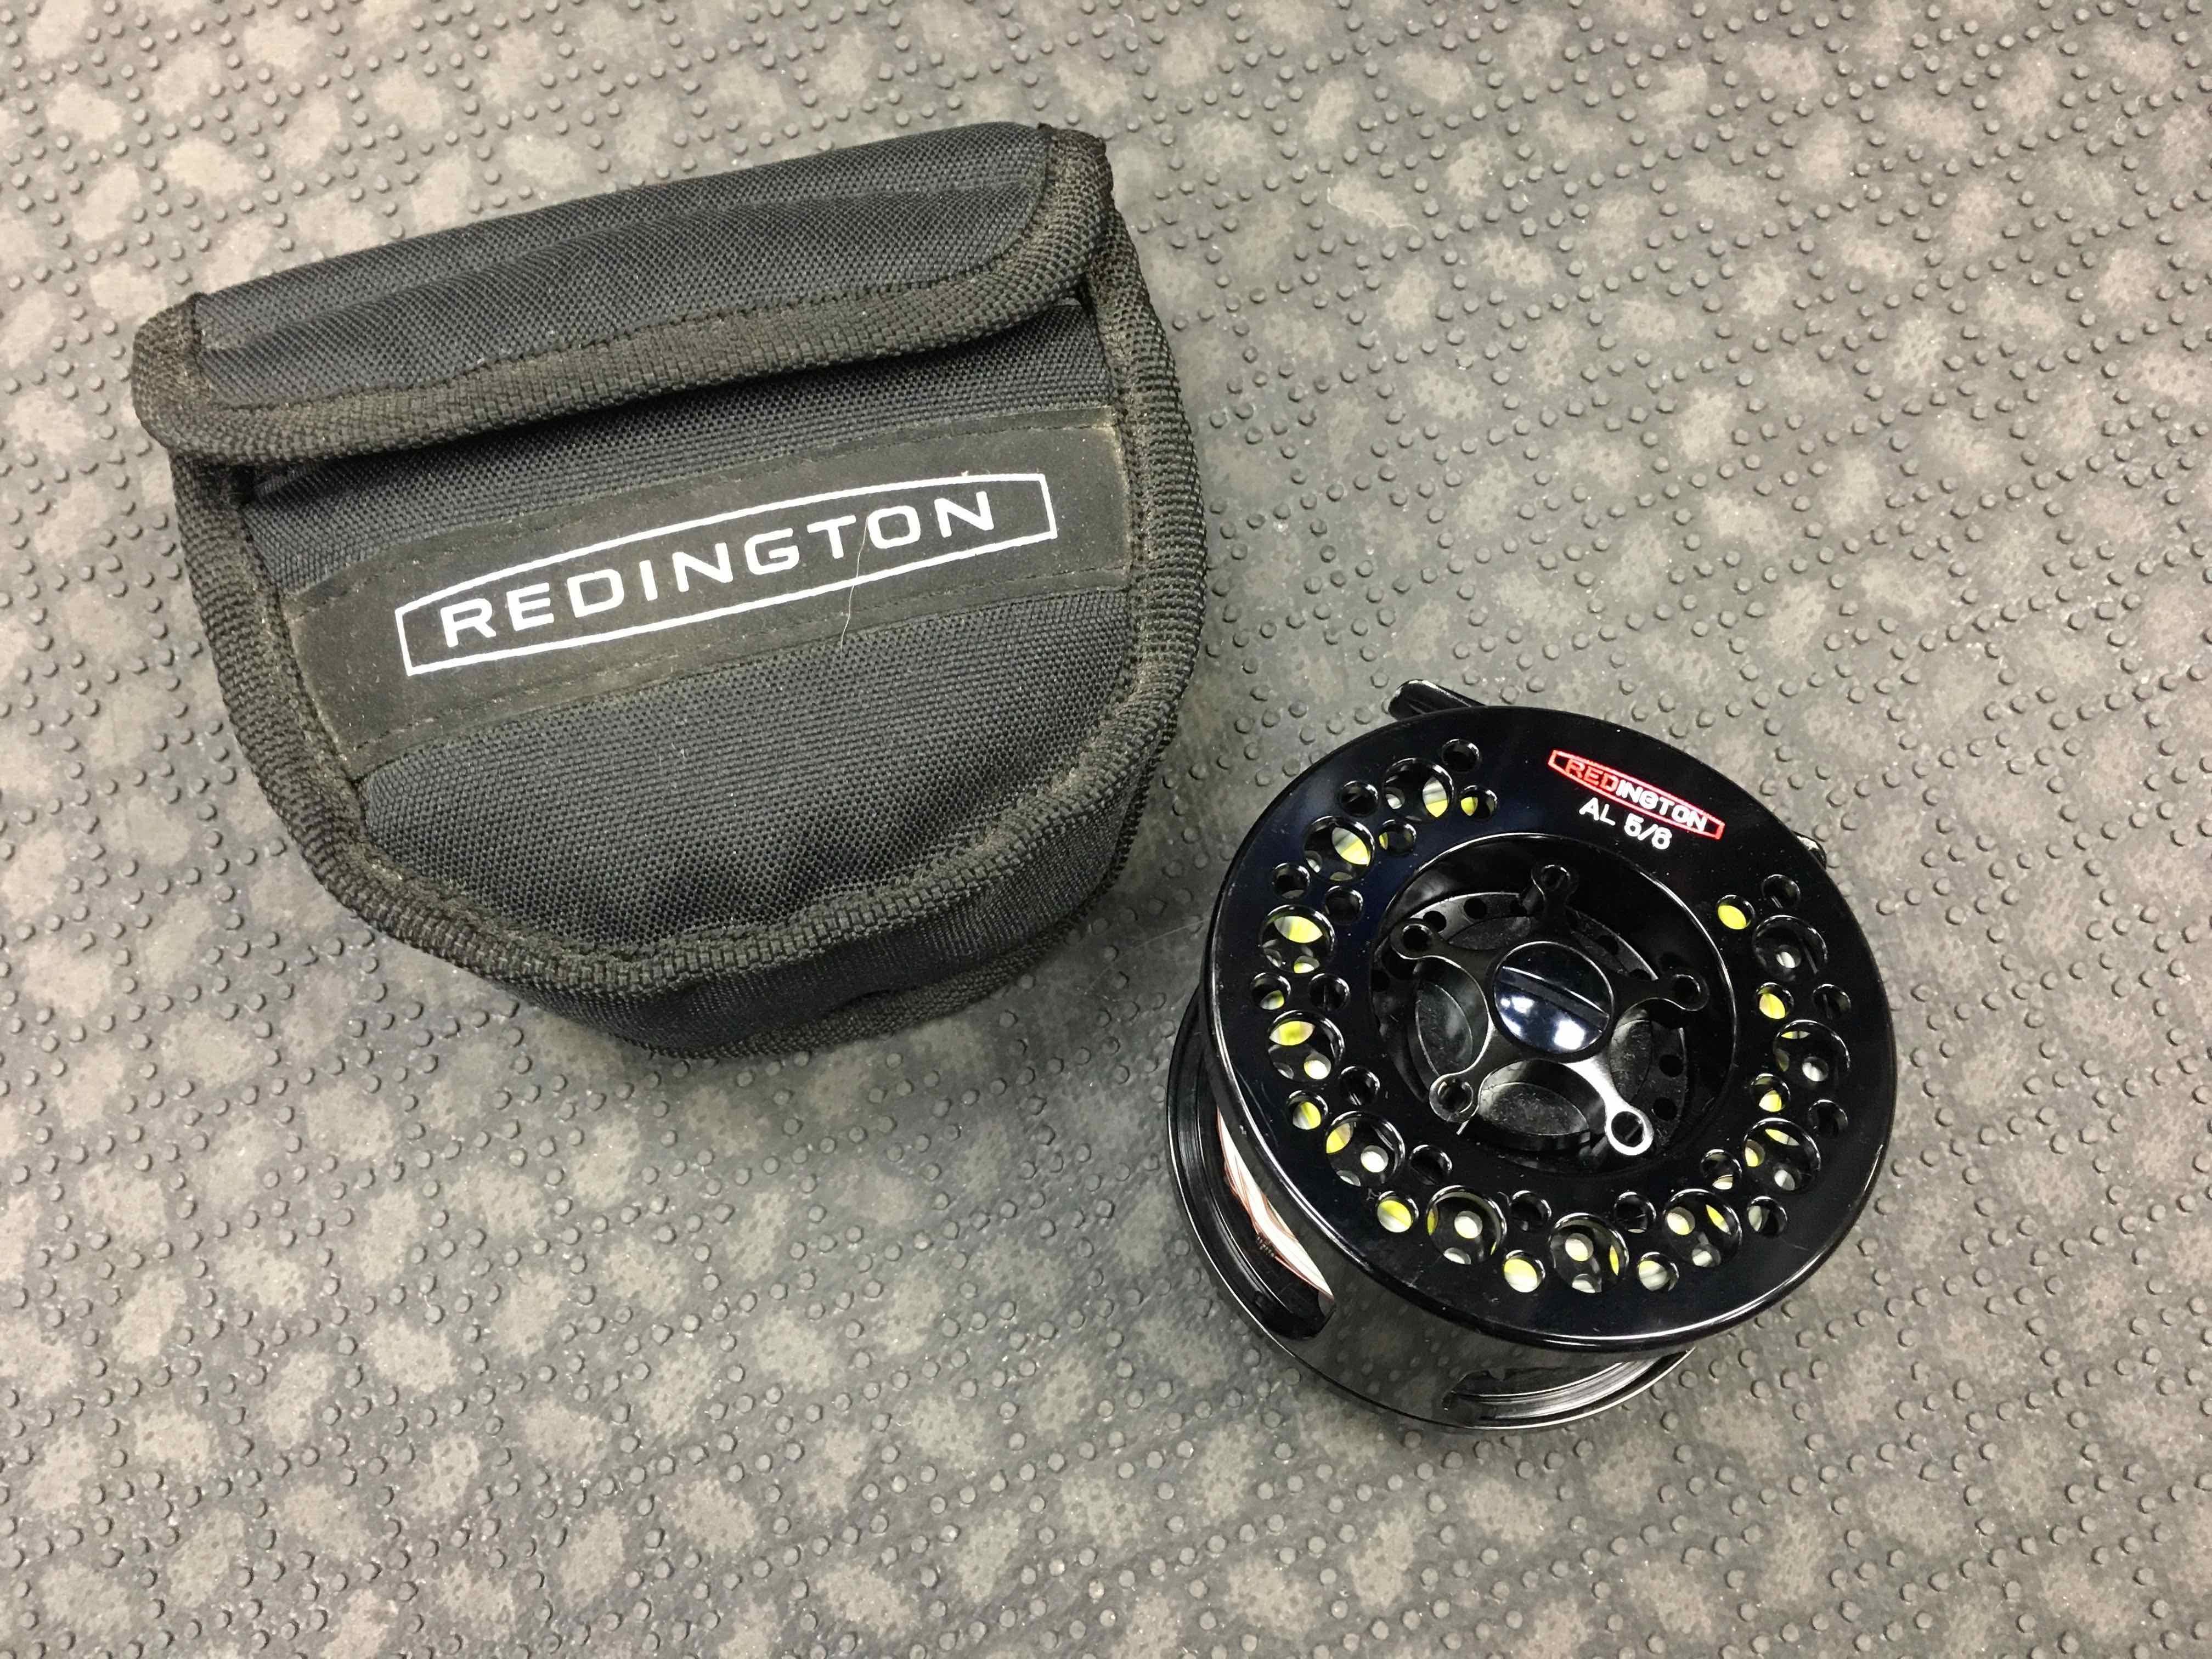 https://thefirstcast.ca/wp-content/uploads/2017/05/Redington-AL-56-Fly-Reel-with-RIO-5wt-Fly-Line-BB.jpg